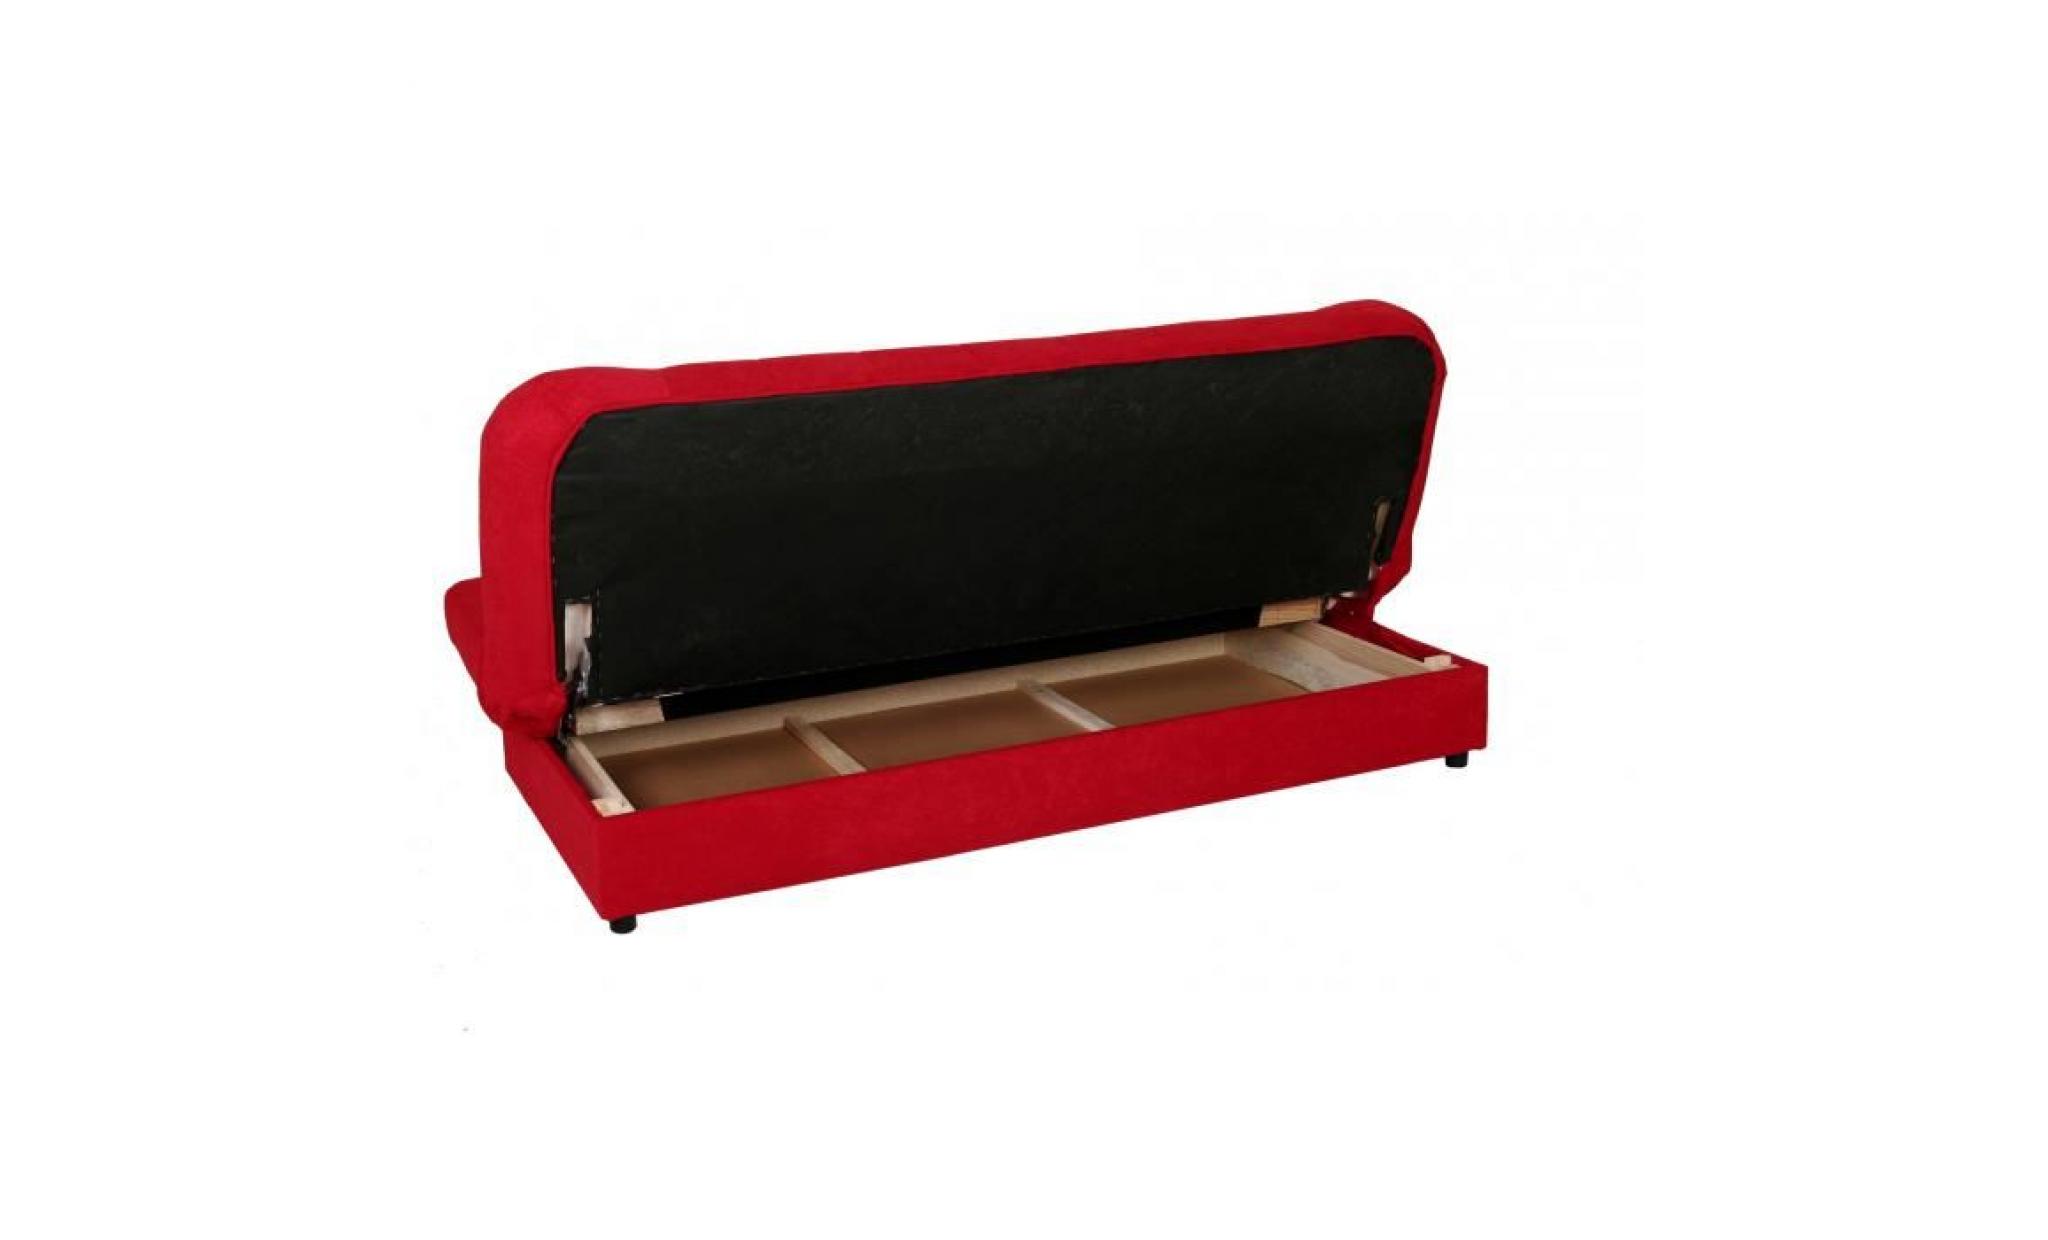 banquette clic clac convertible rouge maddy pas cher